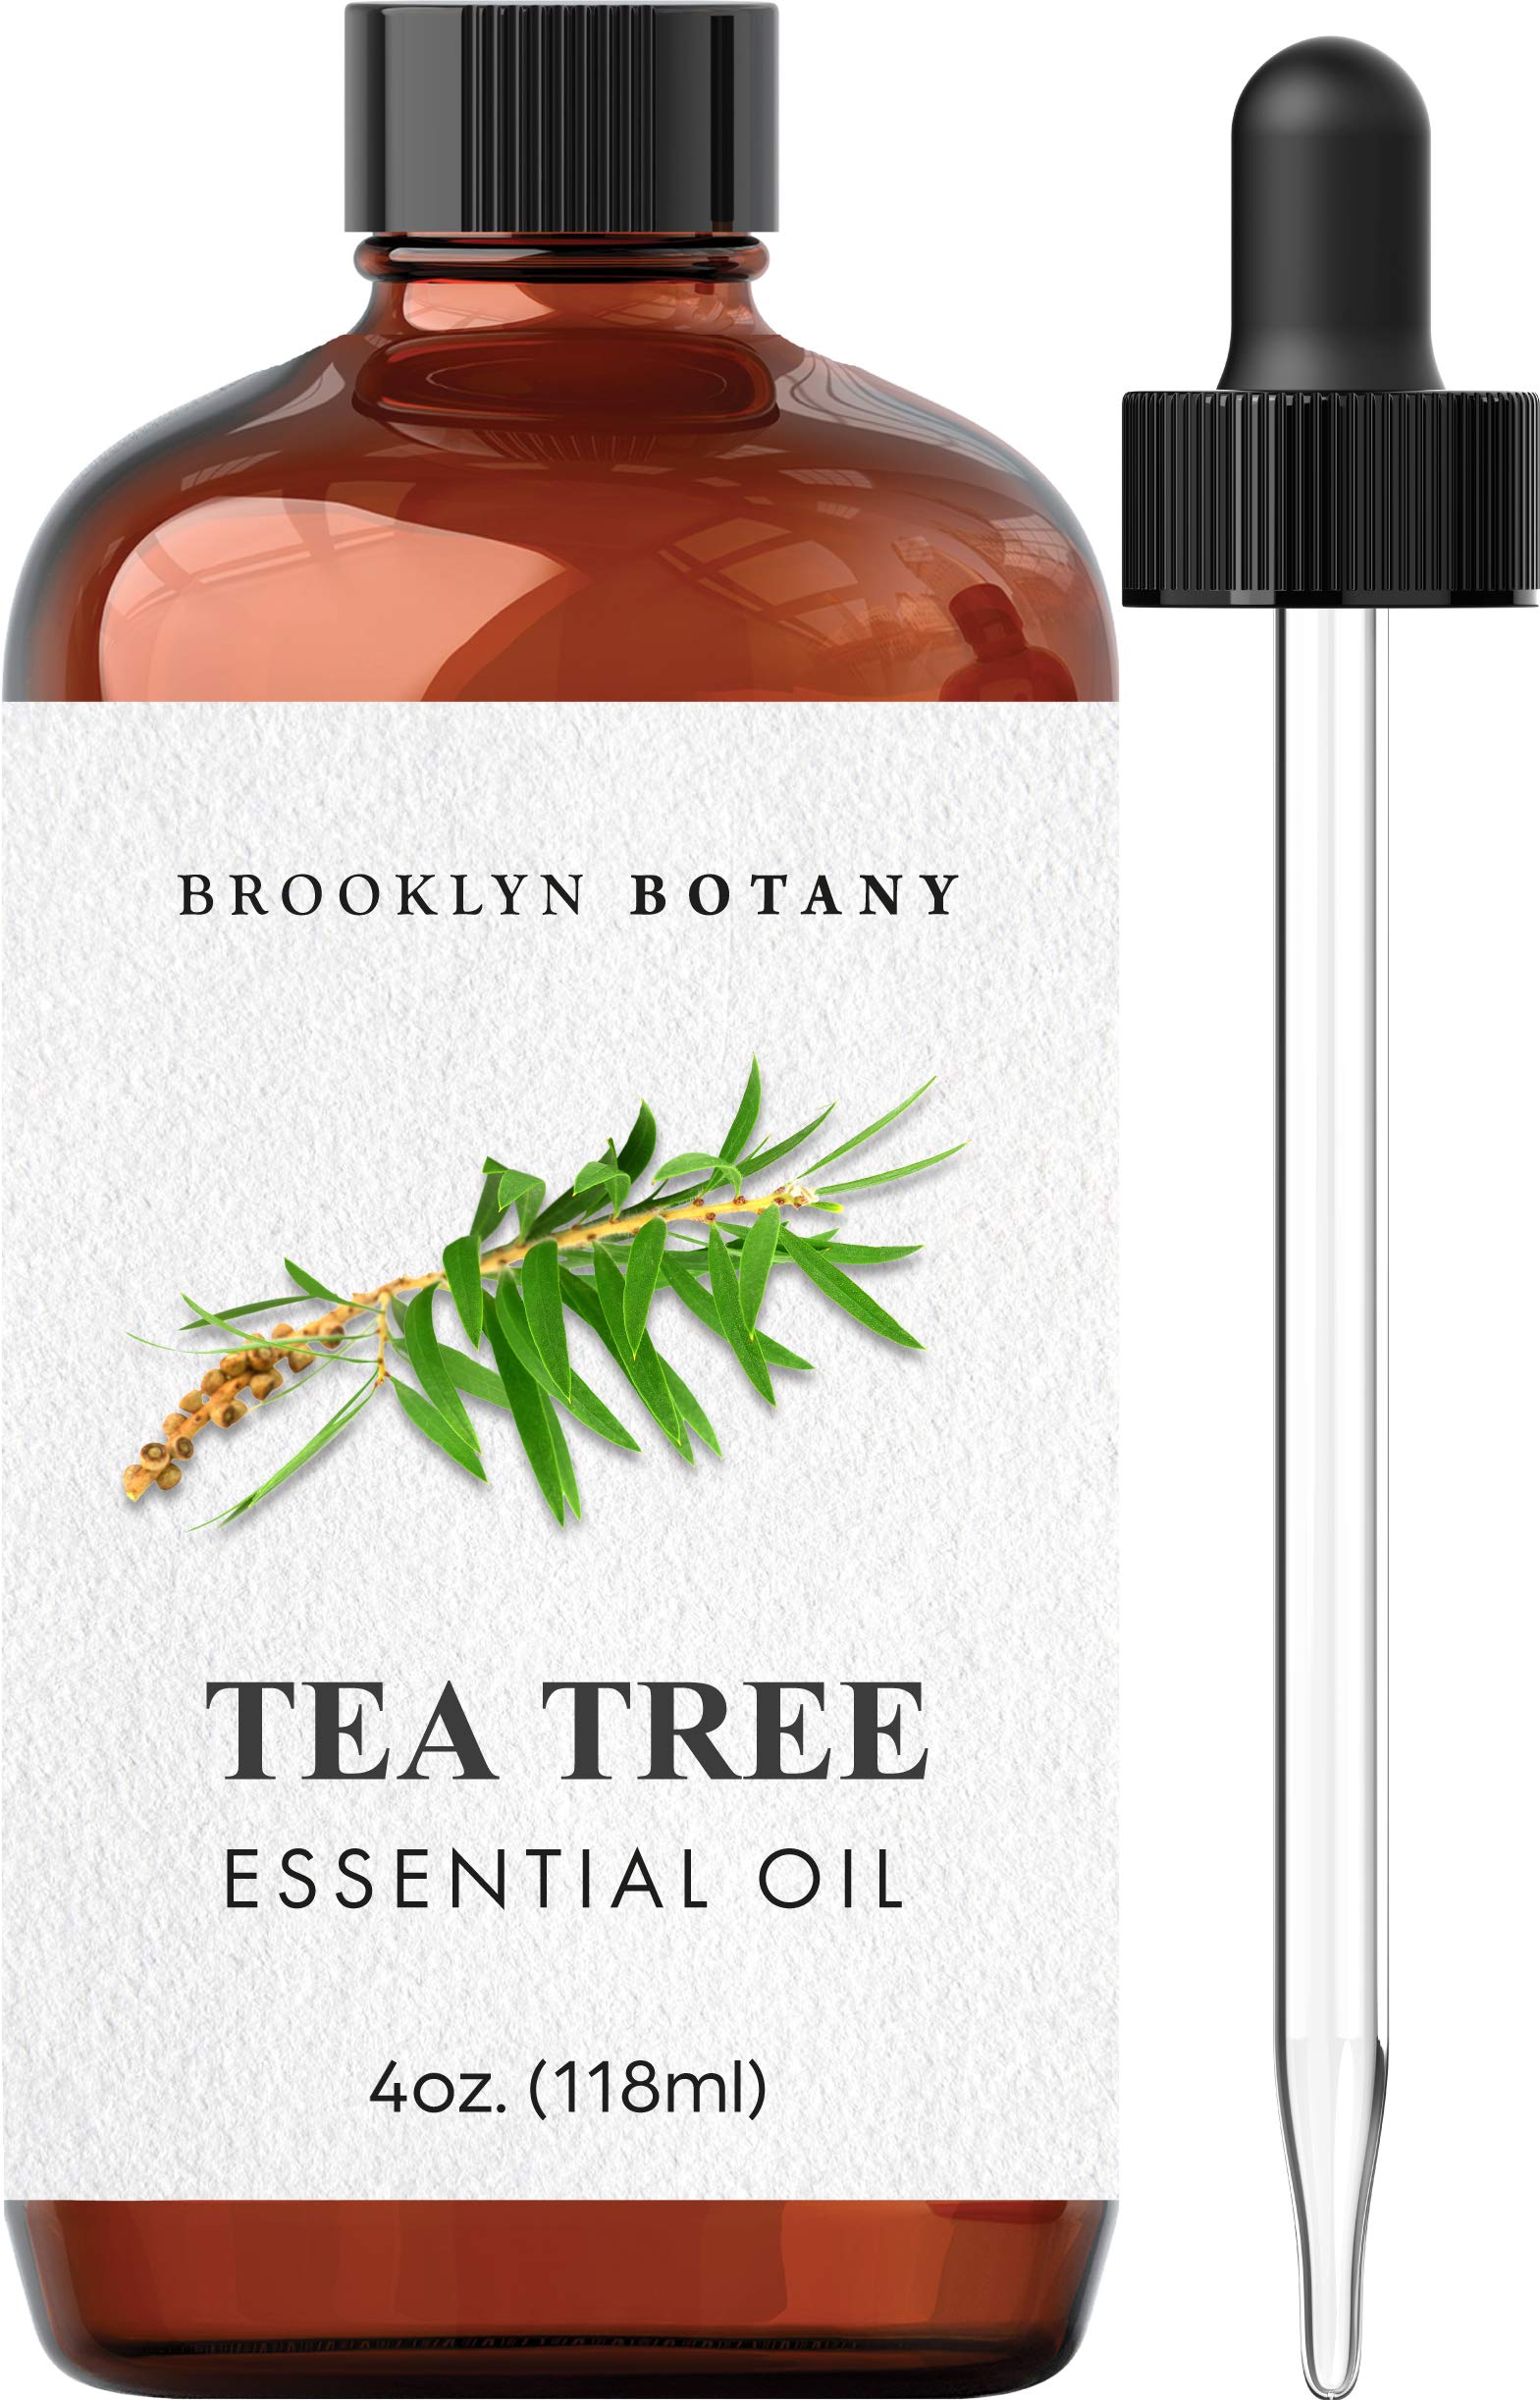 Brooklyn Botany Tea Tree Essential Oil & Lemongrass Essential Oil Set – 100% Pure & Natural – 4 Fl Oz Therapeutic Grade Essential Oil with Glass Dropper - Essential Oil for Aromatherapy and Diffuser